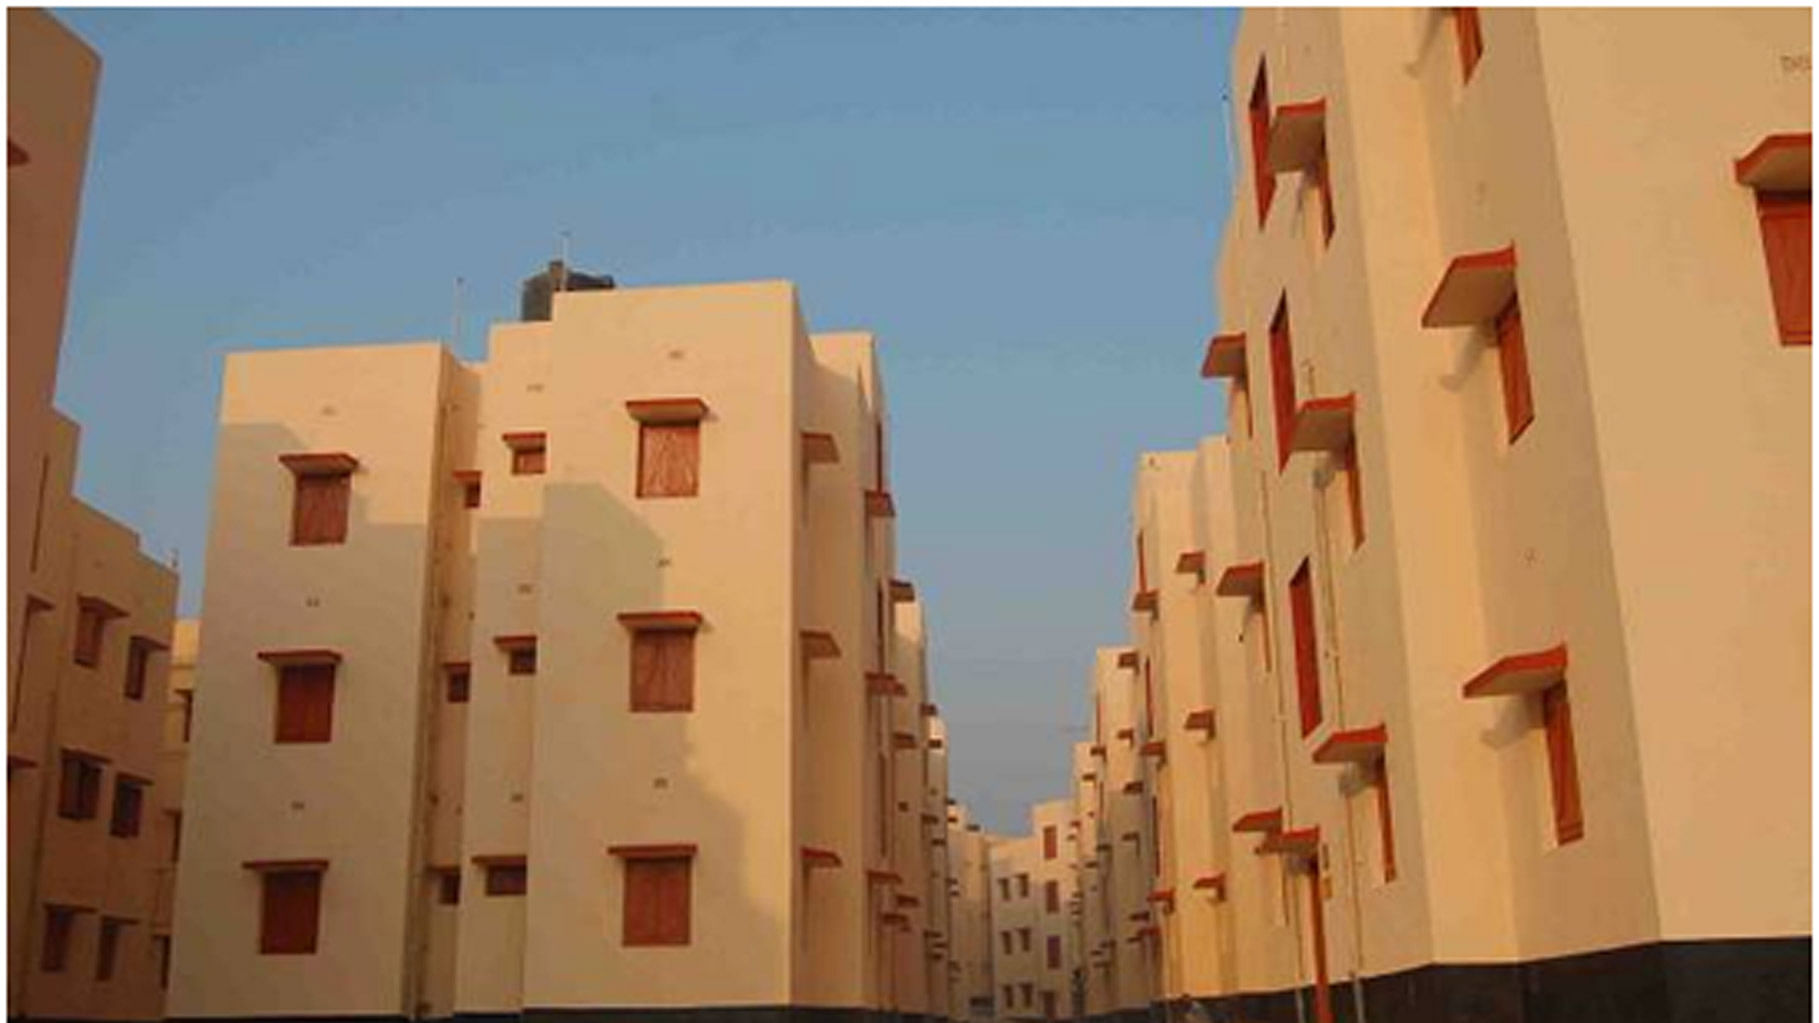 In the last 11 years, three different schemes of housing for the urban poor have been implemented. (Photo Courtesy: Factly/<a href="http://mhupa.gov.in/Images/Rehabilitation%20of%20Slum%20Dwellers%20at%20Durgapur%20in%20Asansol%20Urban%20Area.png">Ministry of Housing and Urban Poverty Alleviation</a> 